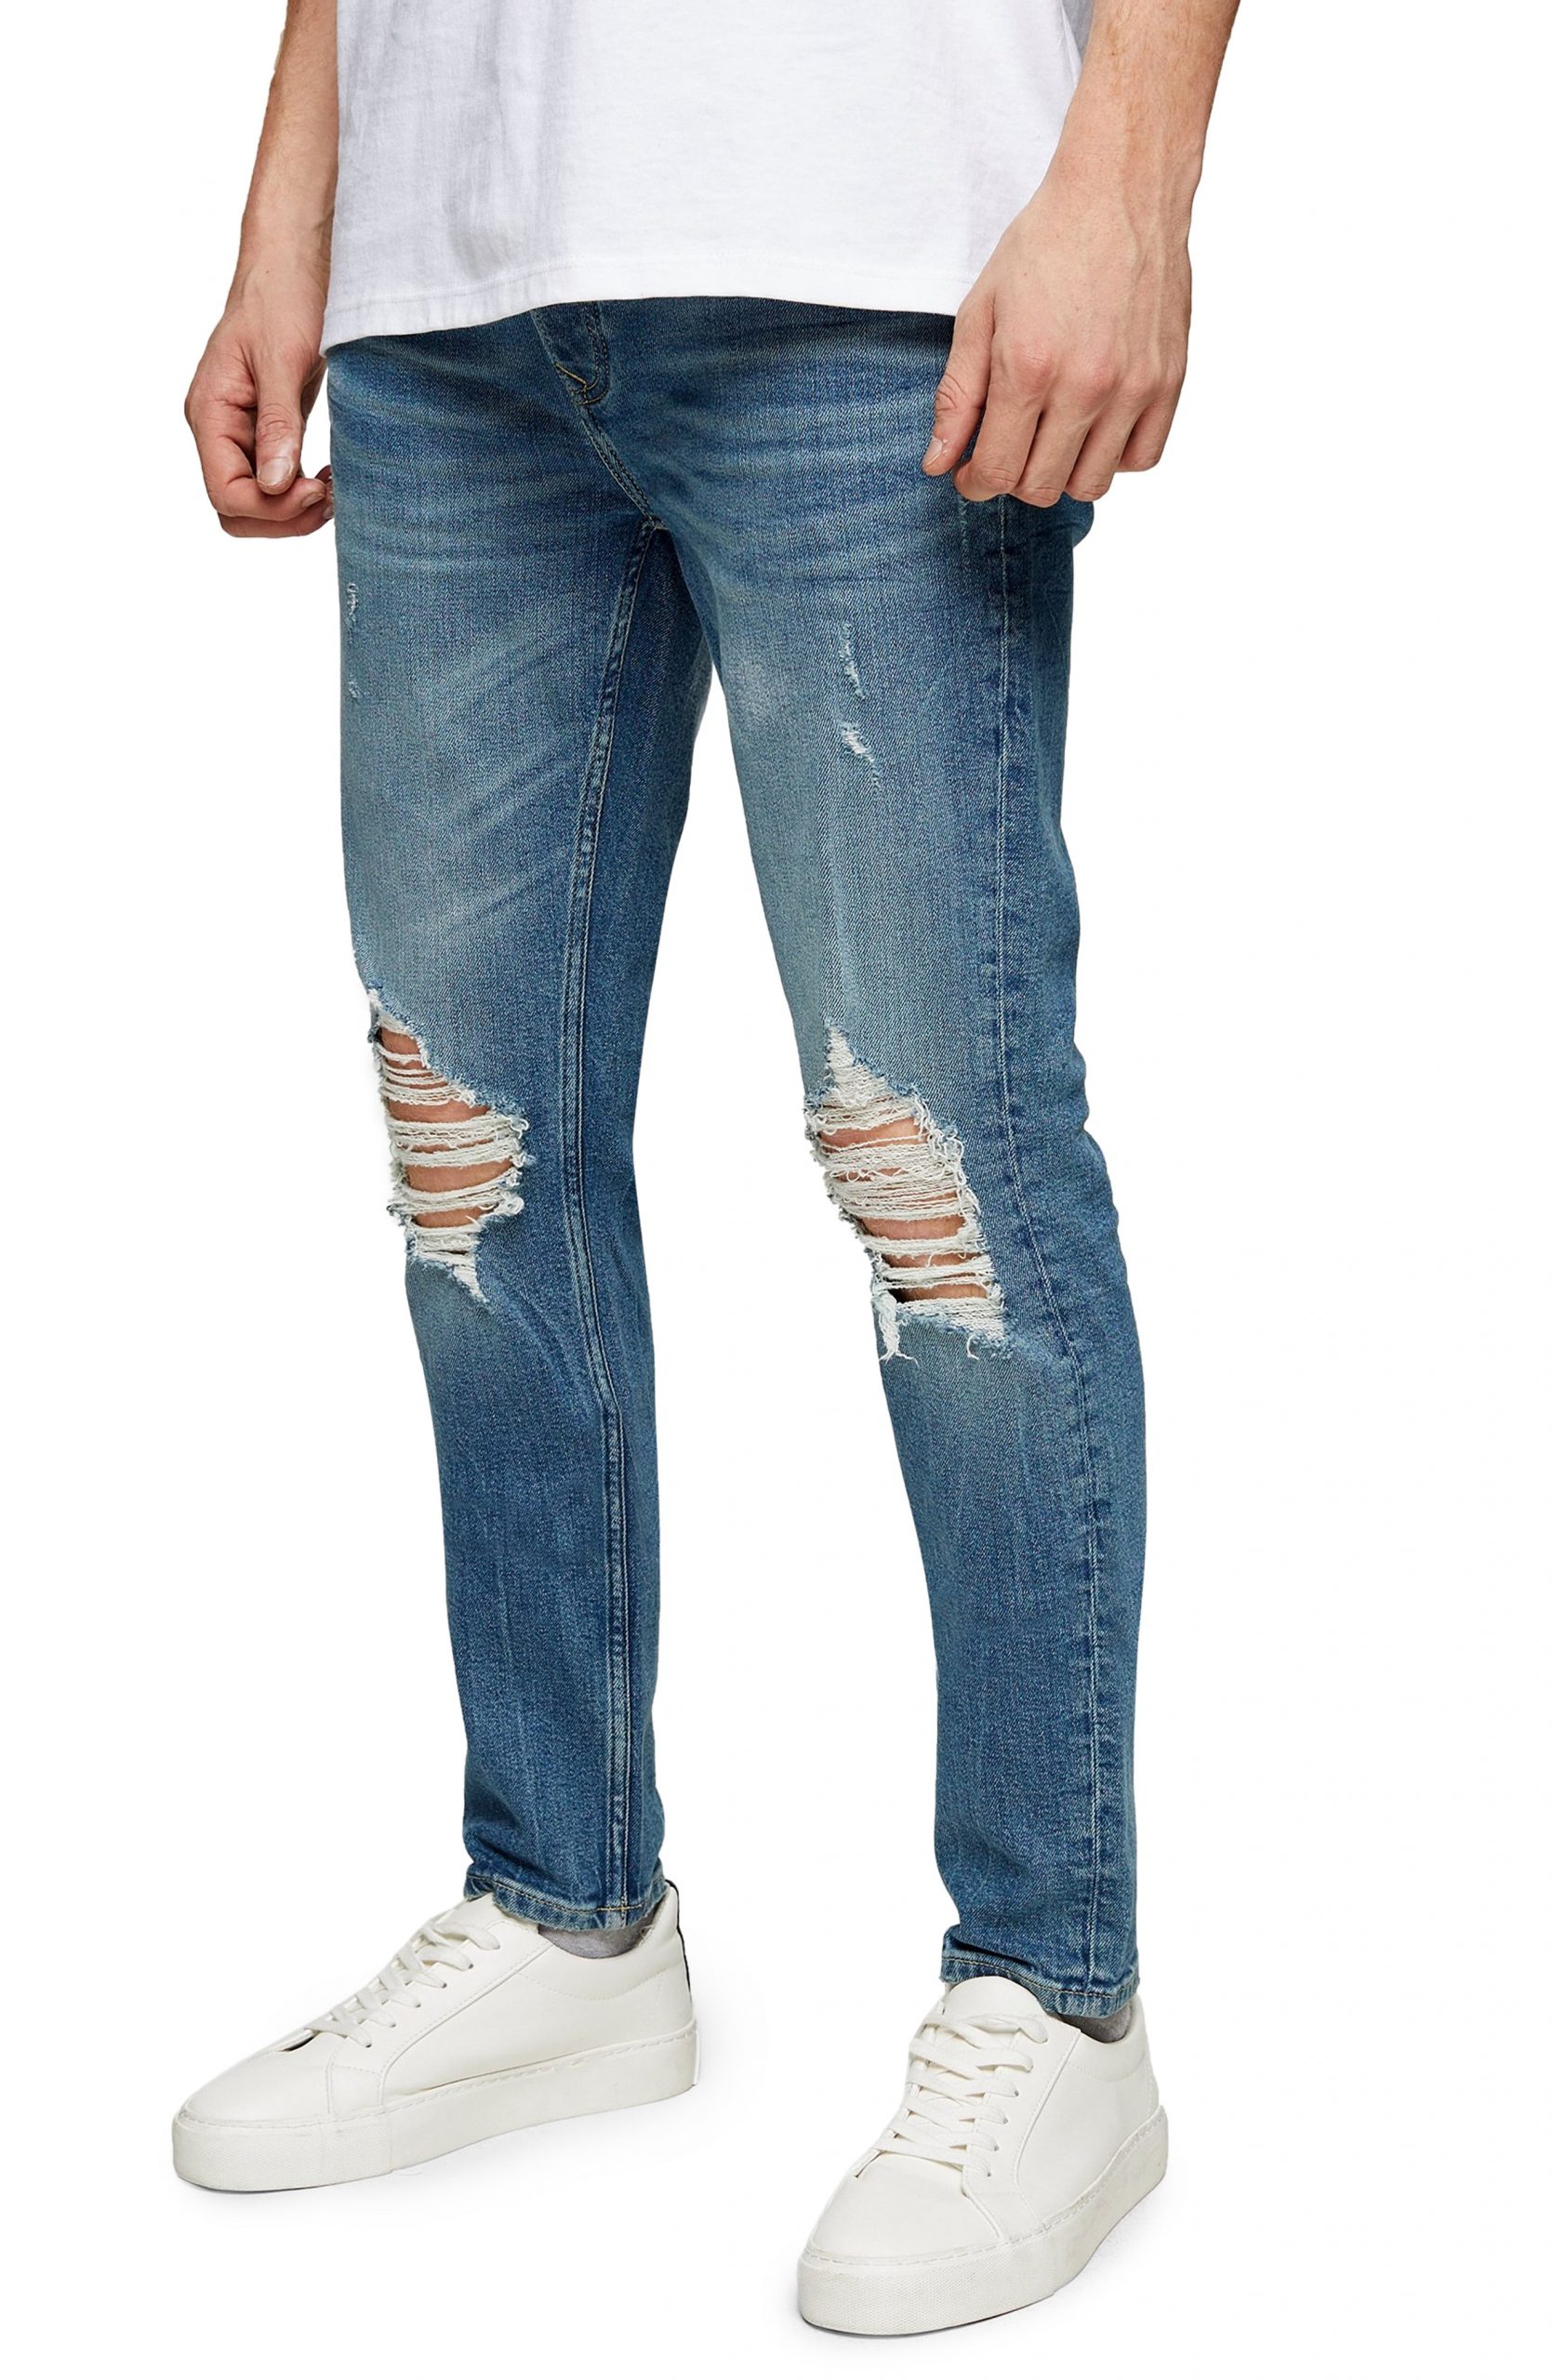 Men’s Topman Cast Skinny Fit Ripped Jeans, Size 30 x 32 - Blue | The ...